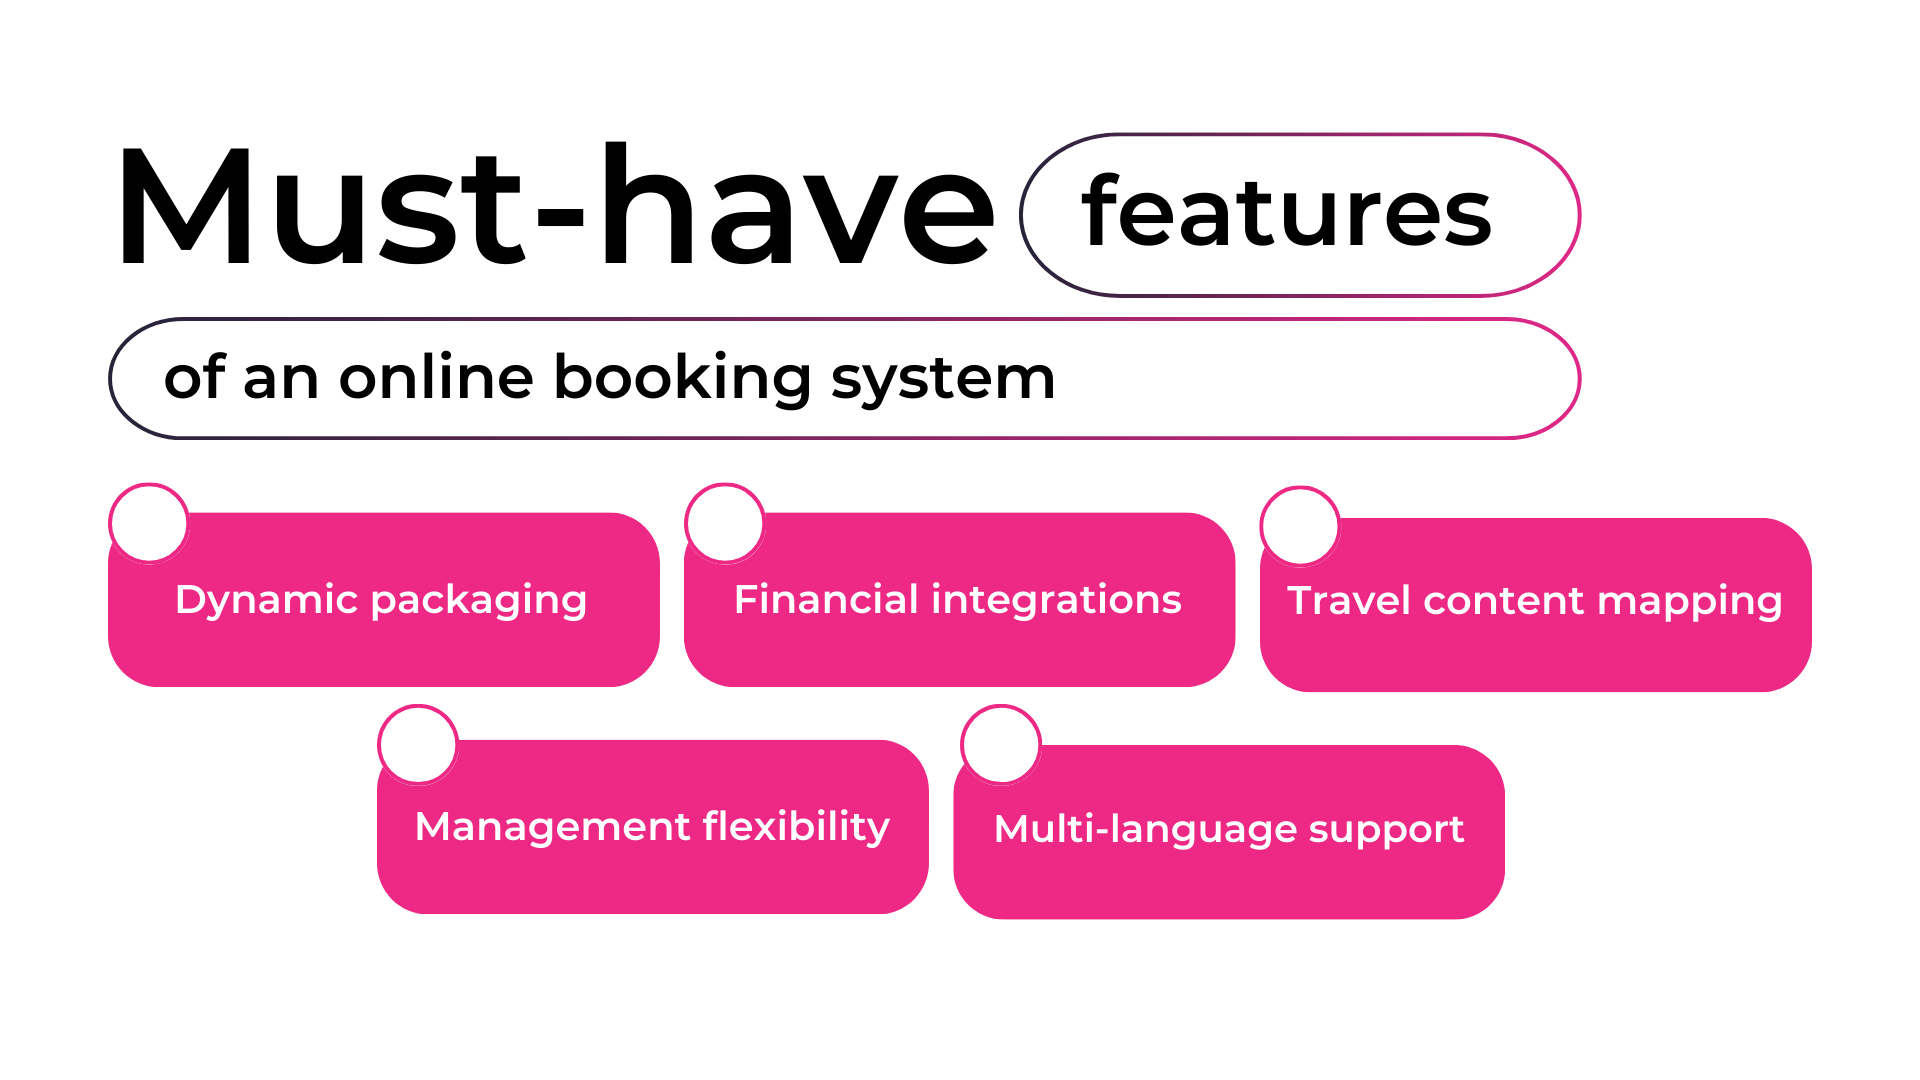 Must-have features of an online booking system